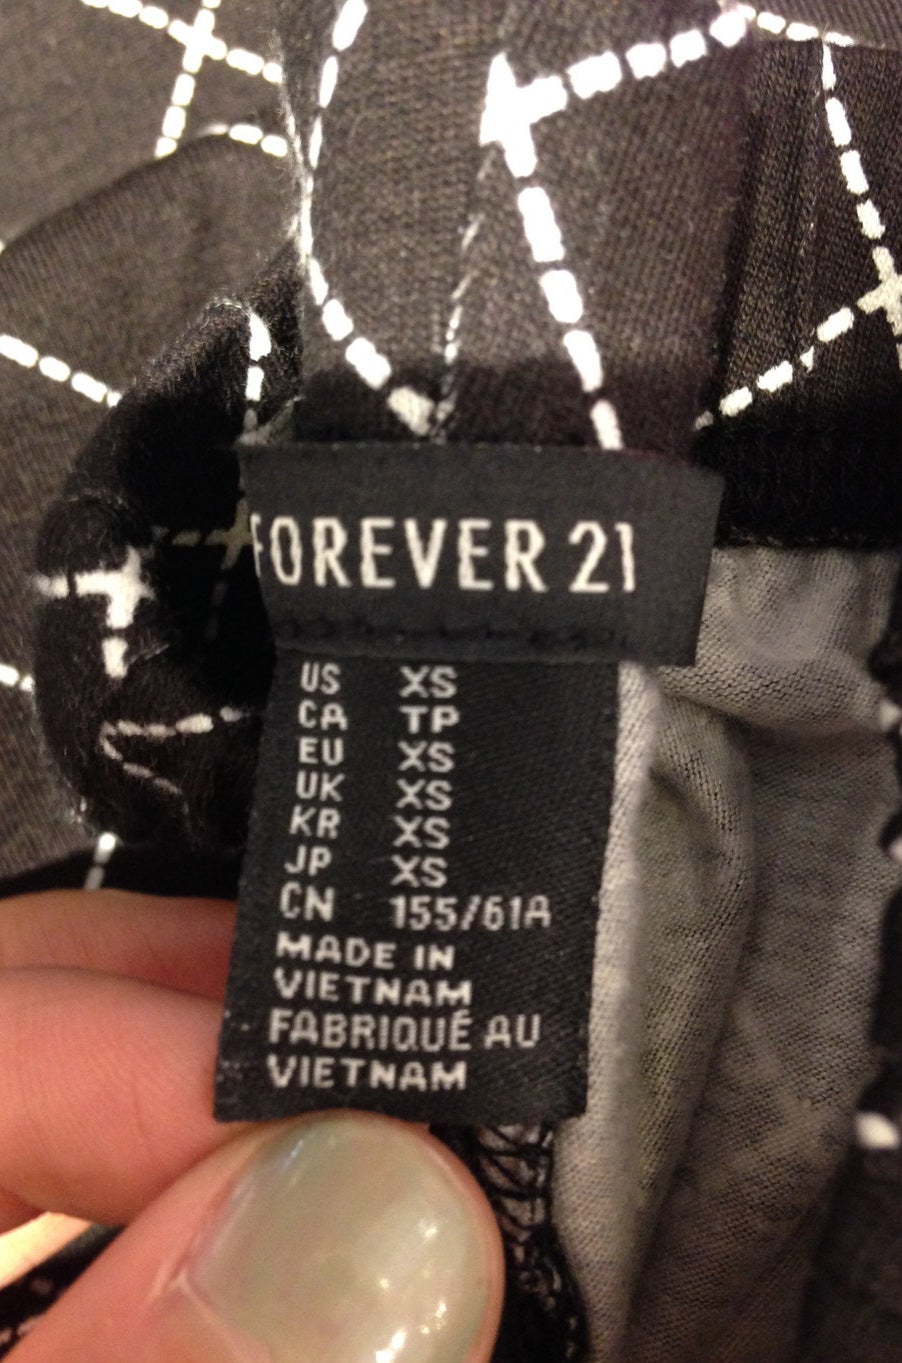 An Even Cheaper Forever 21 Highlights Low-Cost Manufacturing